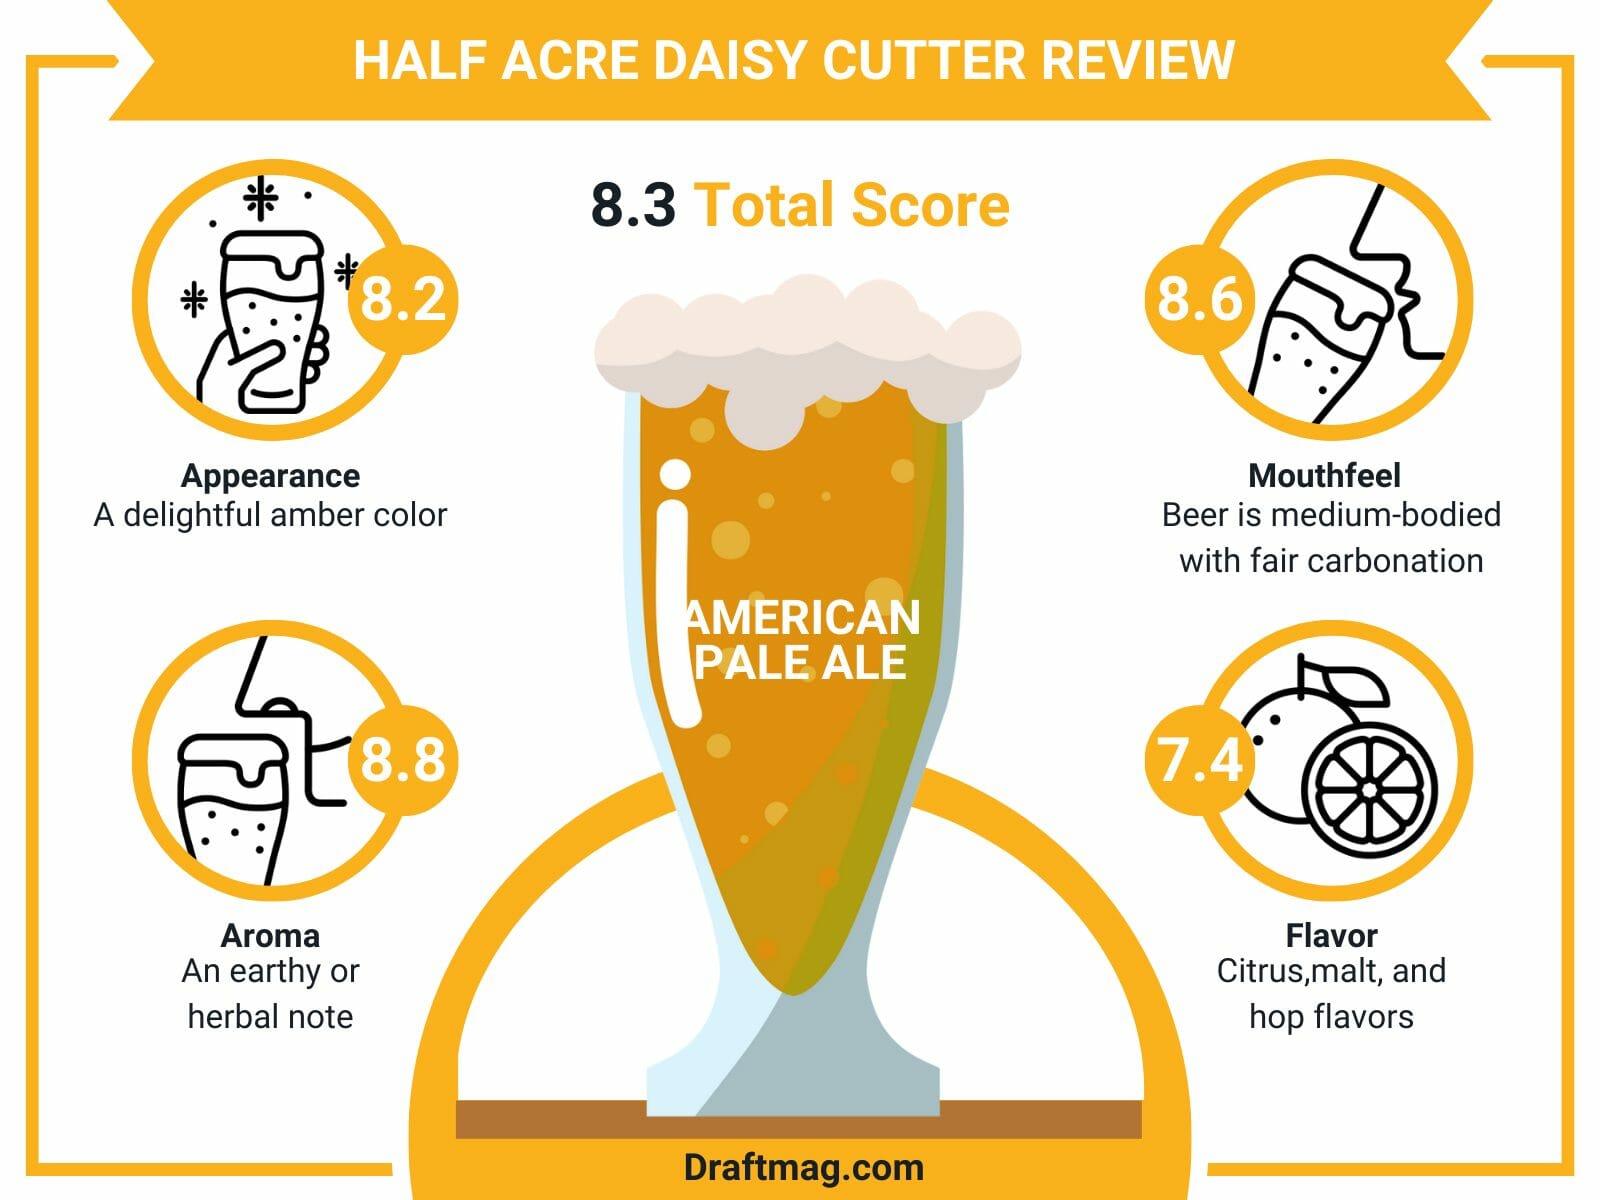 Half acre daisy cutter review infographic